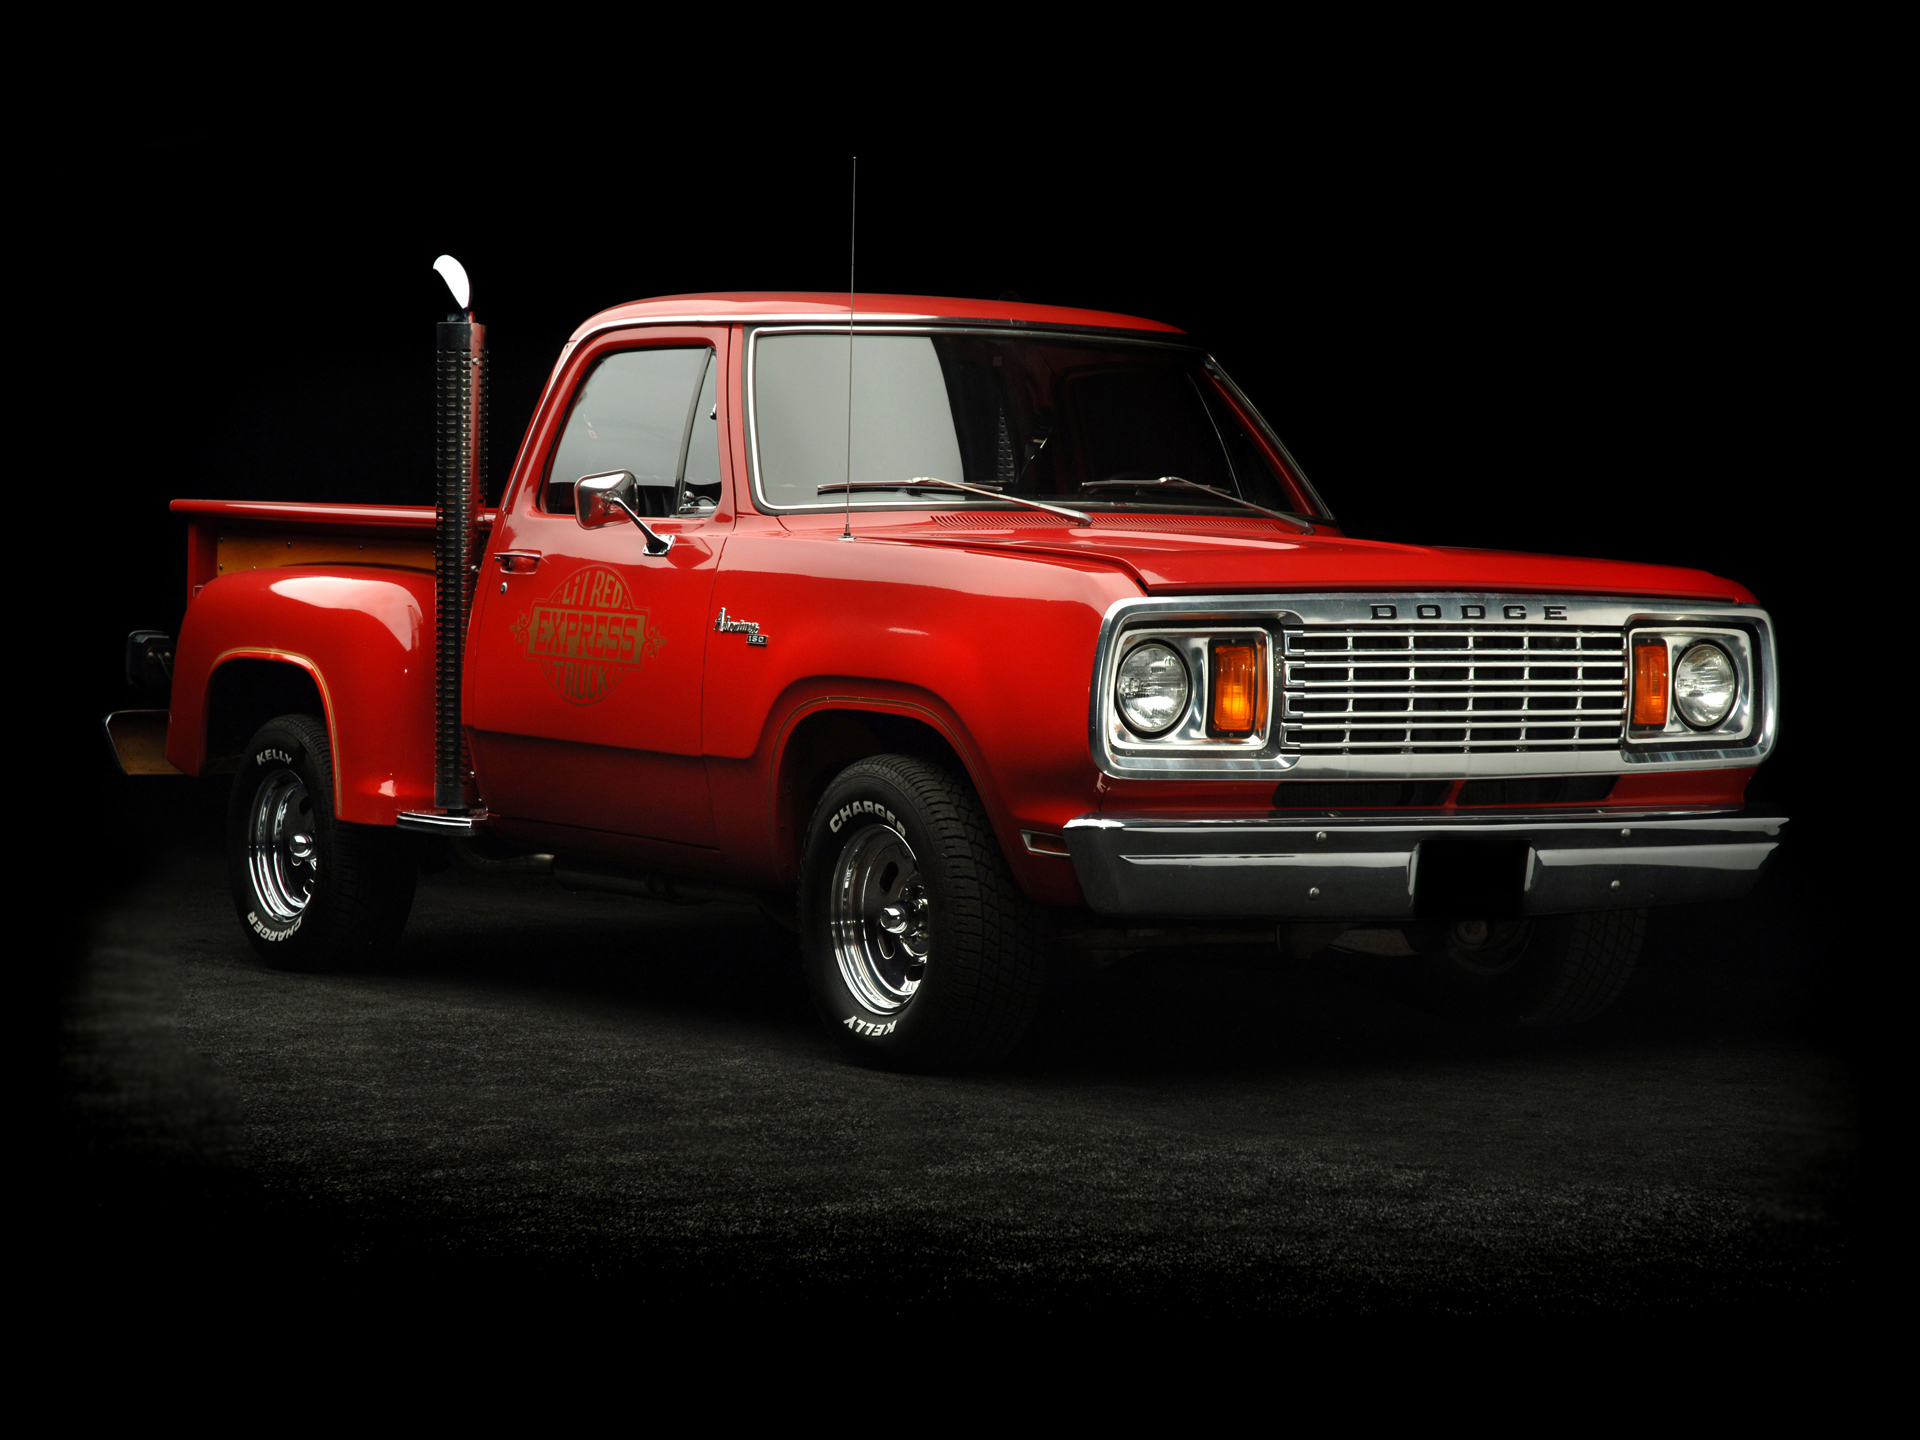 Red Express Truck Pickup Hot Rod Rods Classic F Wallpaper Background